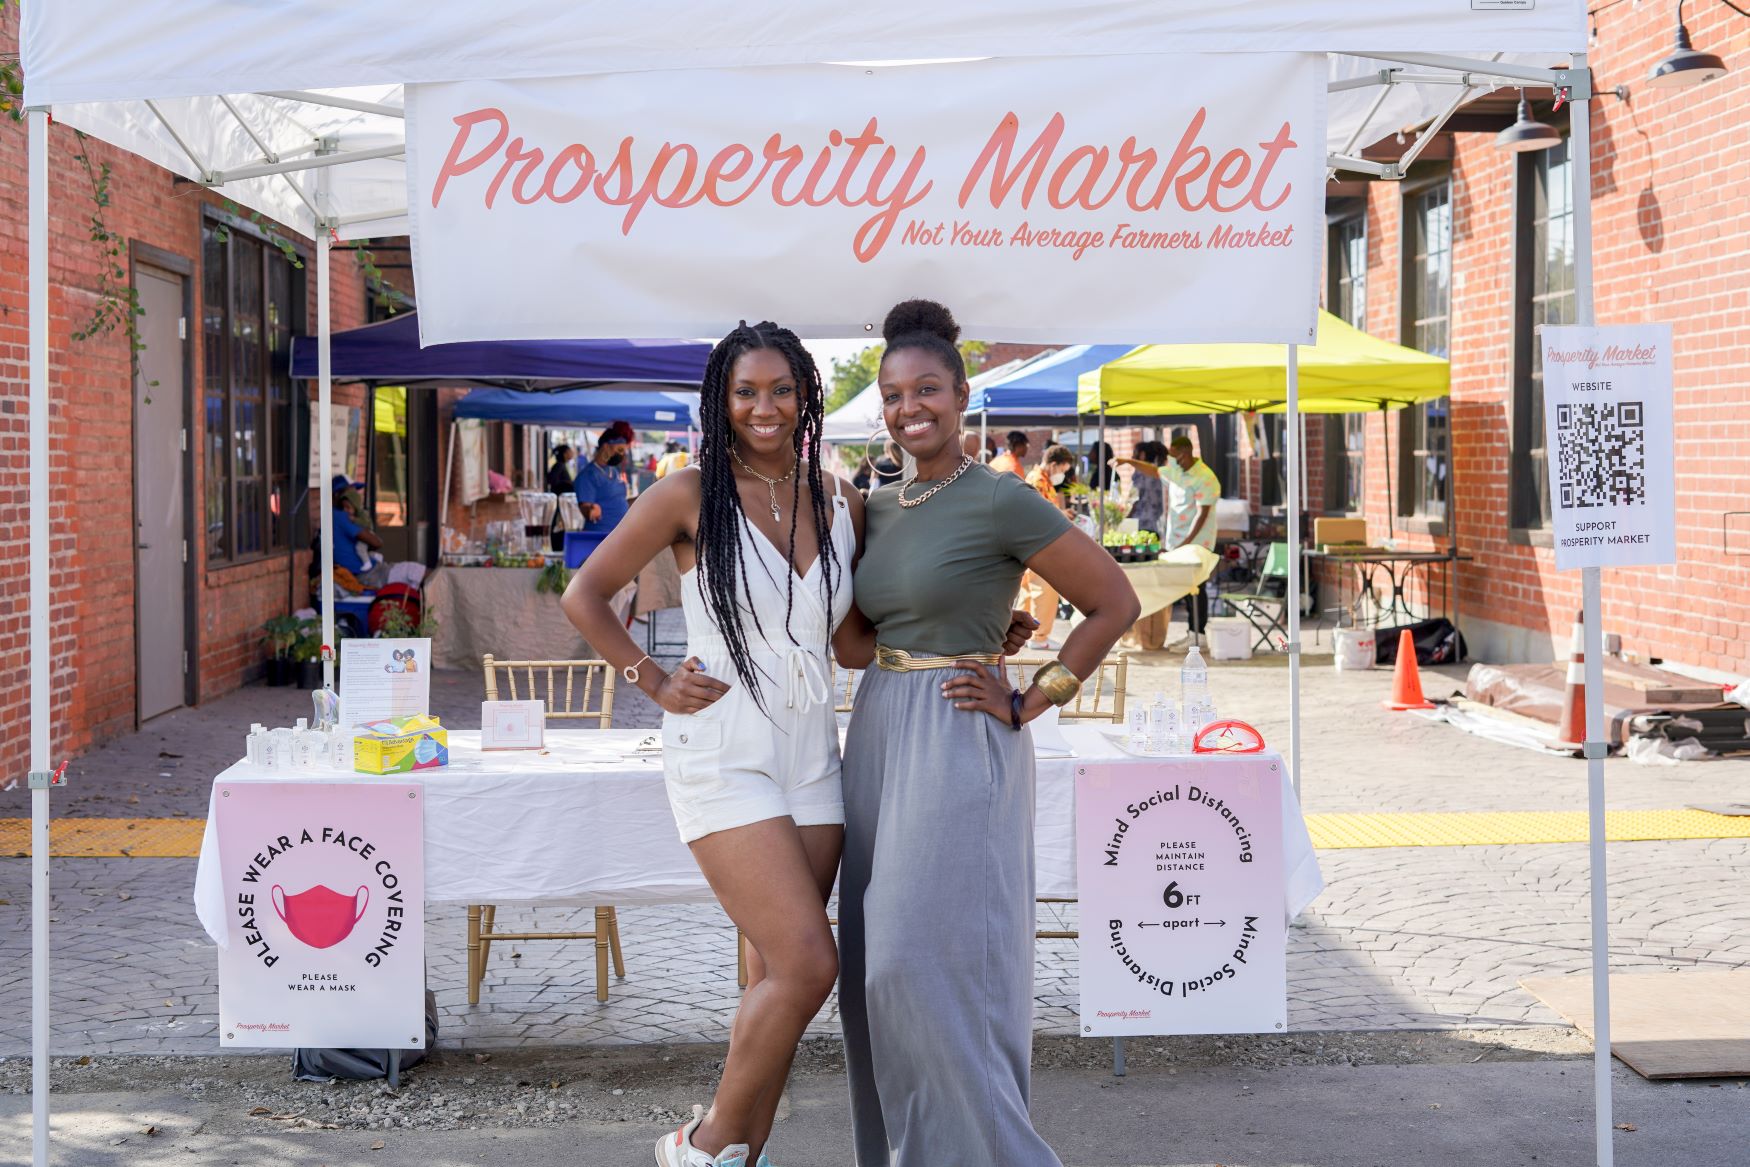 An image of the owners of Prosperity Market.